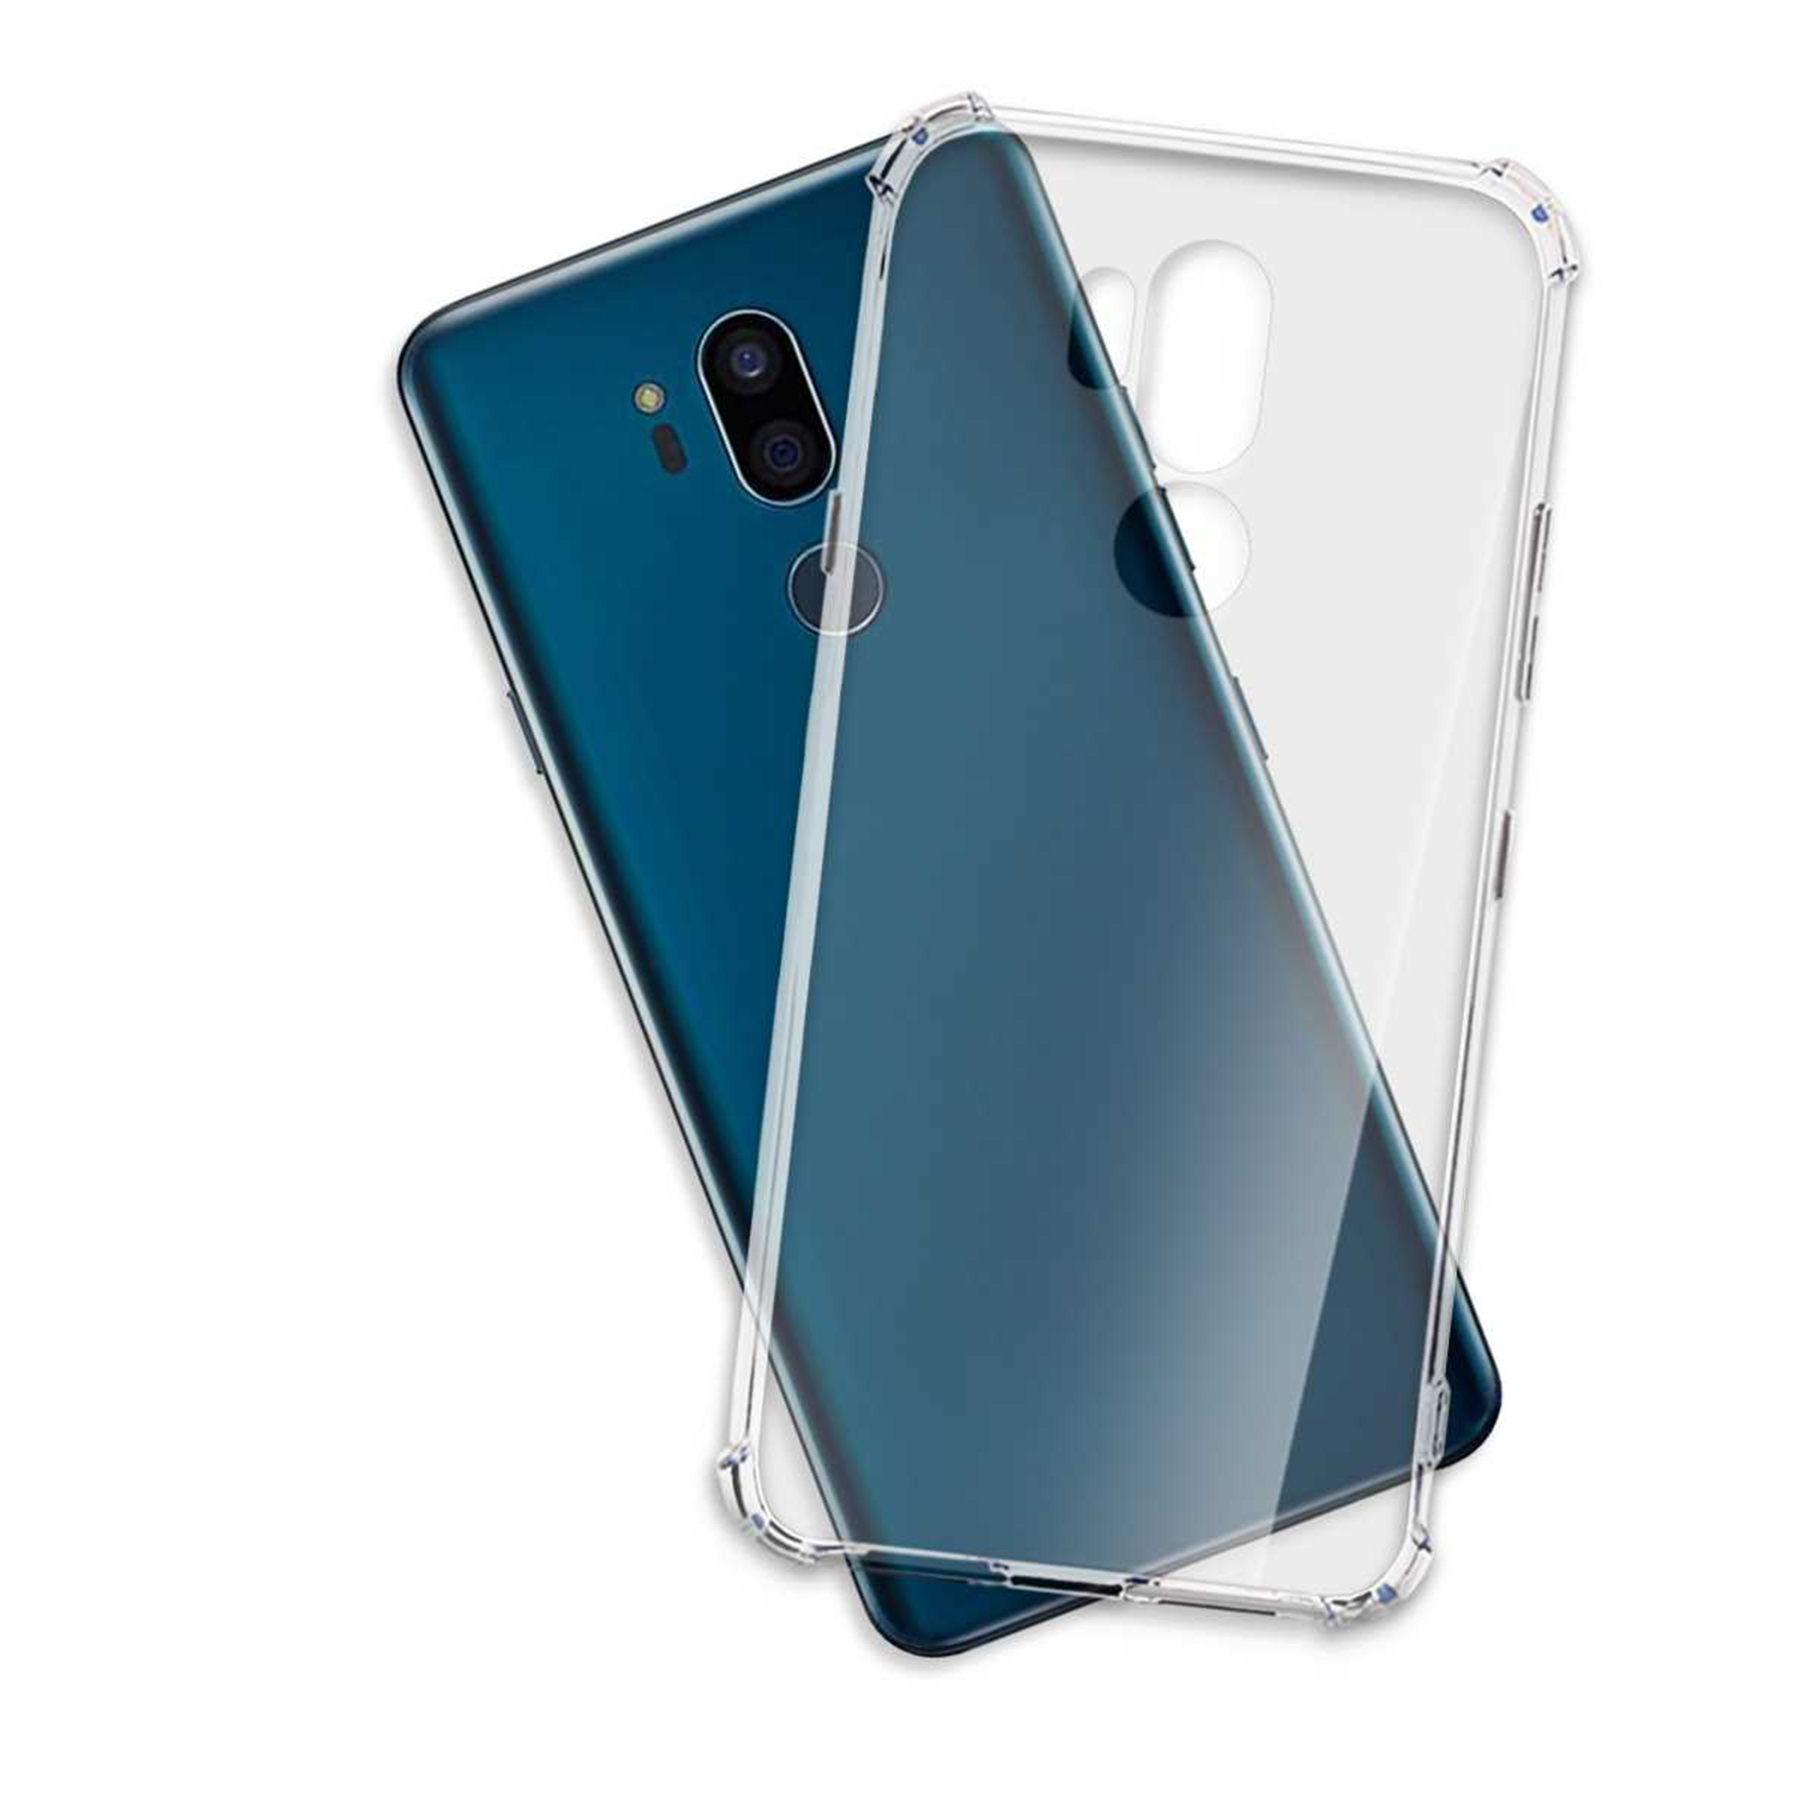 Transparent G7+, MTB Clear Thin ENERGY Case, MORE Backcover, G7 Armor Q, LG,